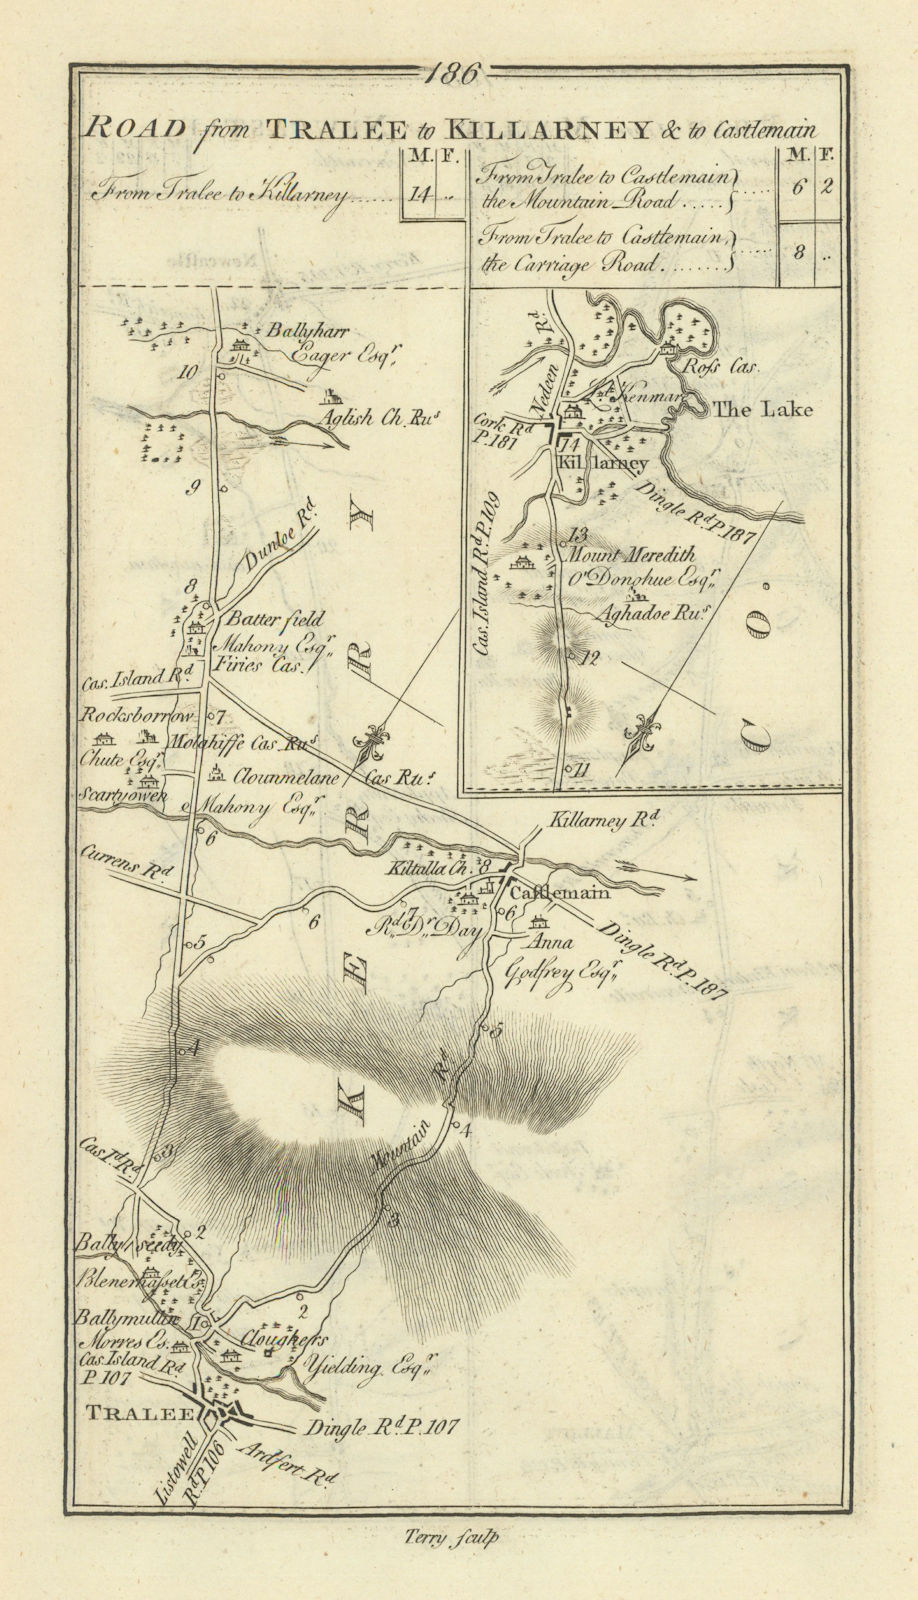 Associate Product #186 Tralee to Killarney & Castlemaine. Kerry. TAYLOR/SKINNER 1778 old map